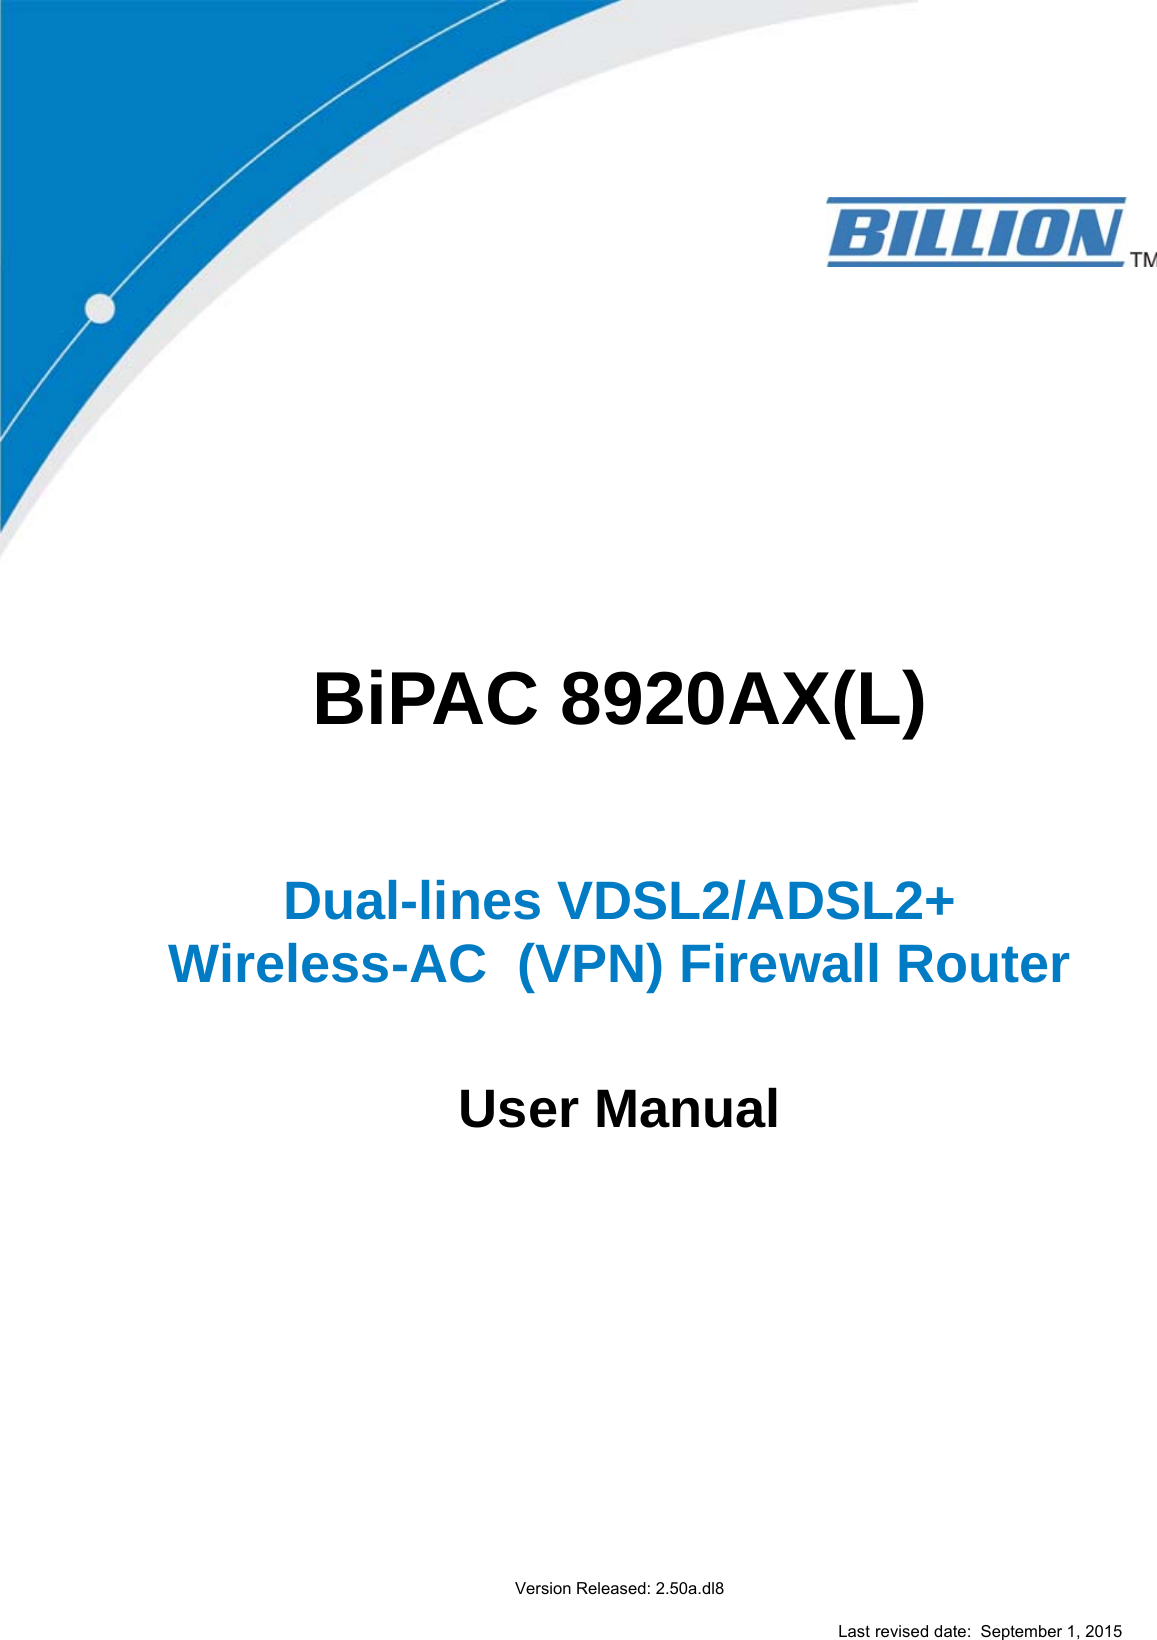                    BiPAC 8920AX(L)       Dual-lines VDSL2/ADSL2+  Wireless-AC  (VPN) Firewall Router     User Manual                      Version Released: 2.50a.dl8  Last revised date:  September 1, 2015 